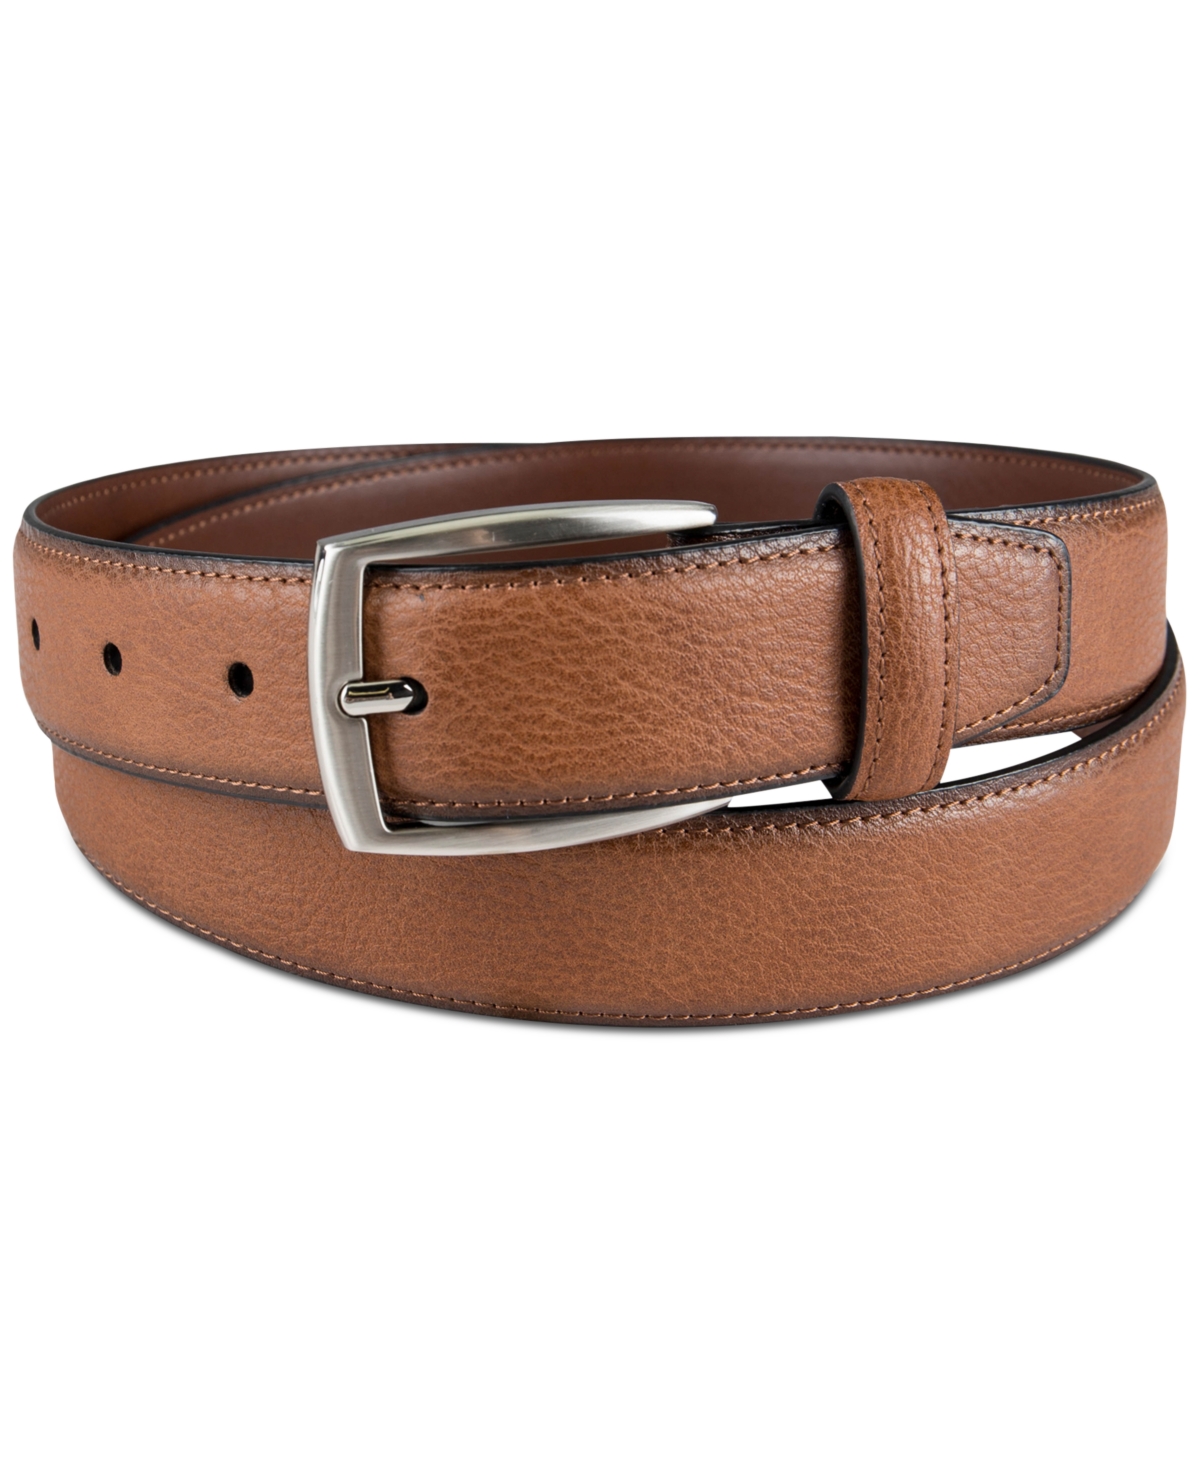 Men's Faux Leather Pebble Grain Stretch Belt, Created for Macy's - Tan